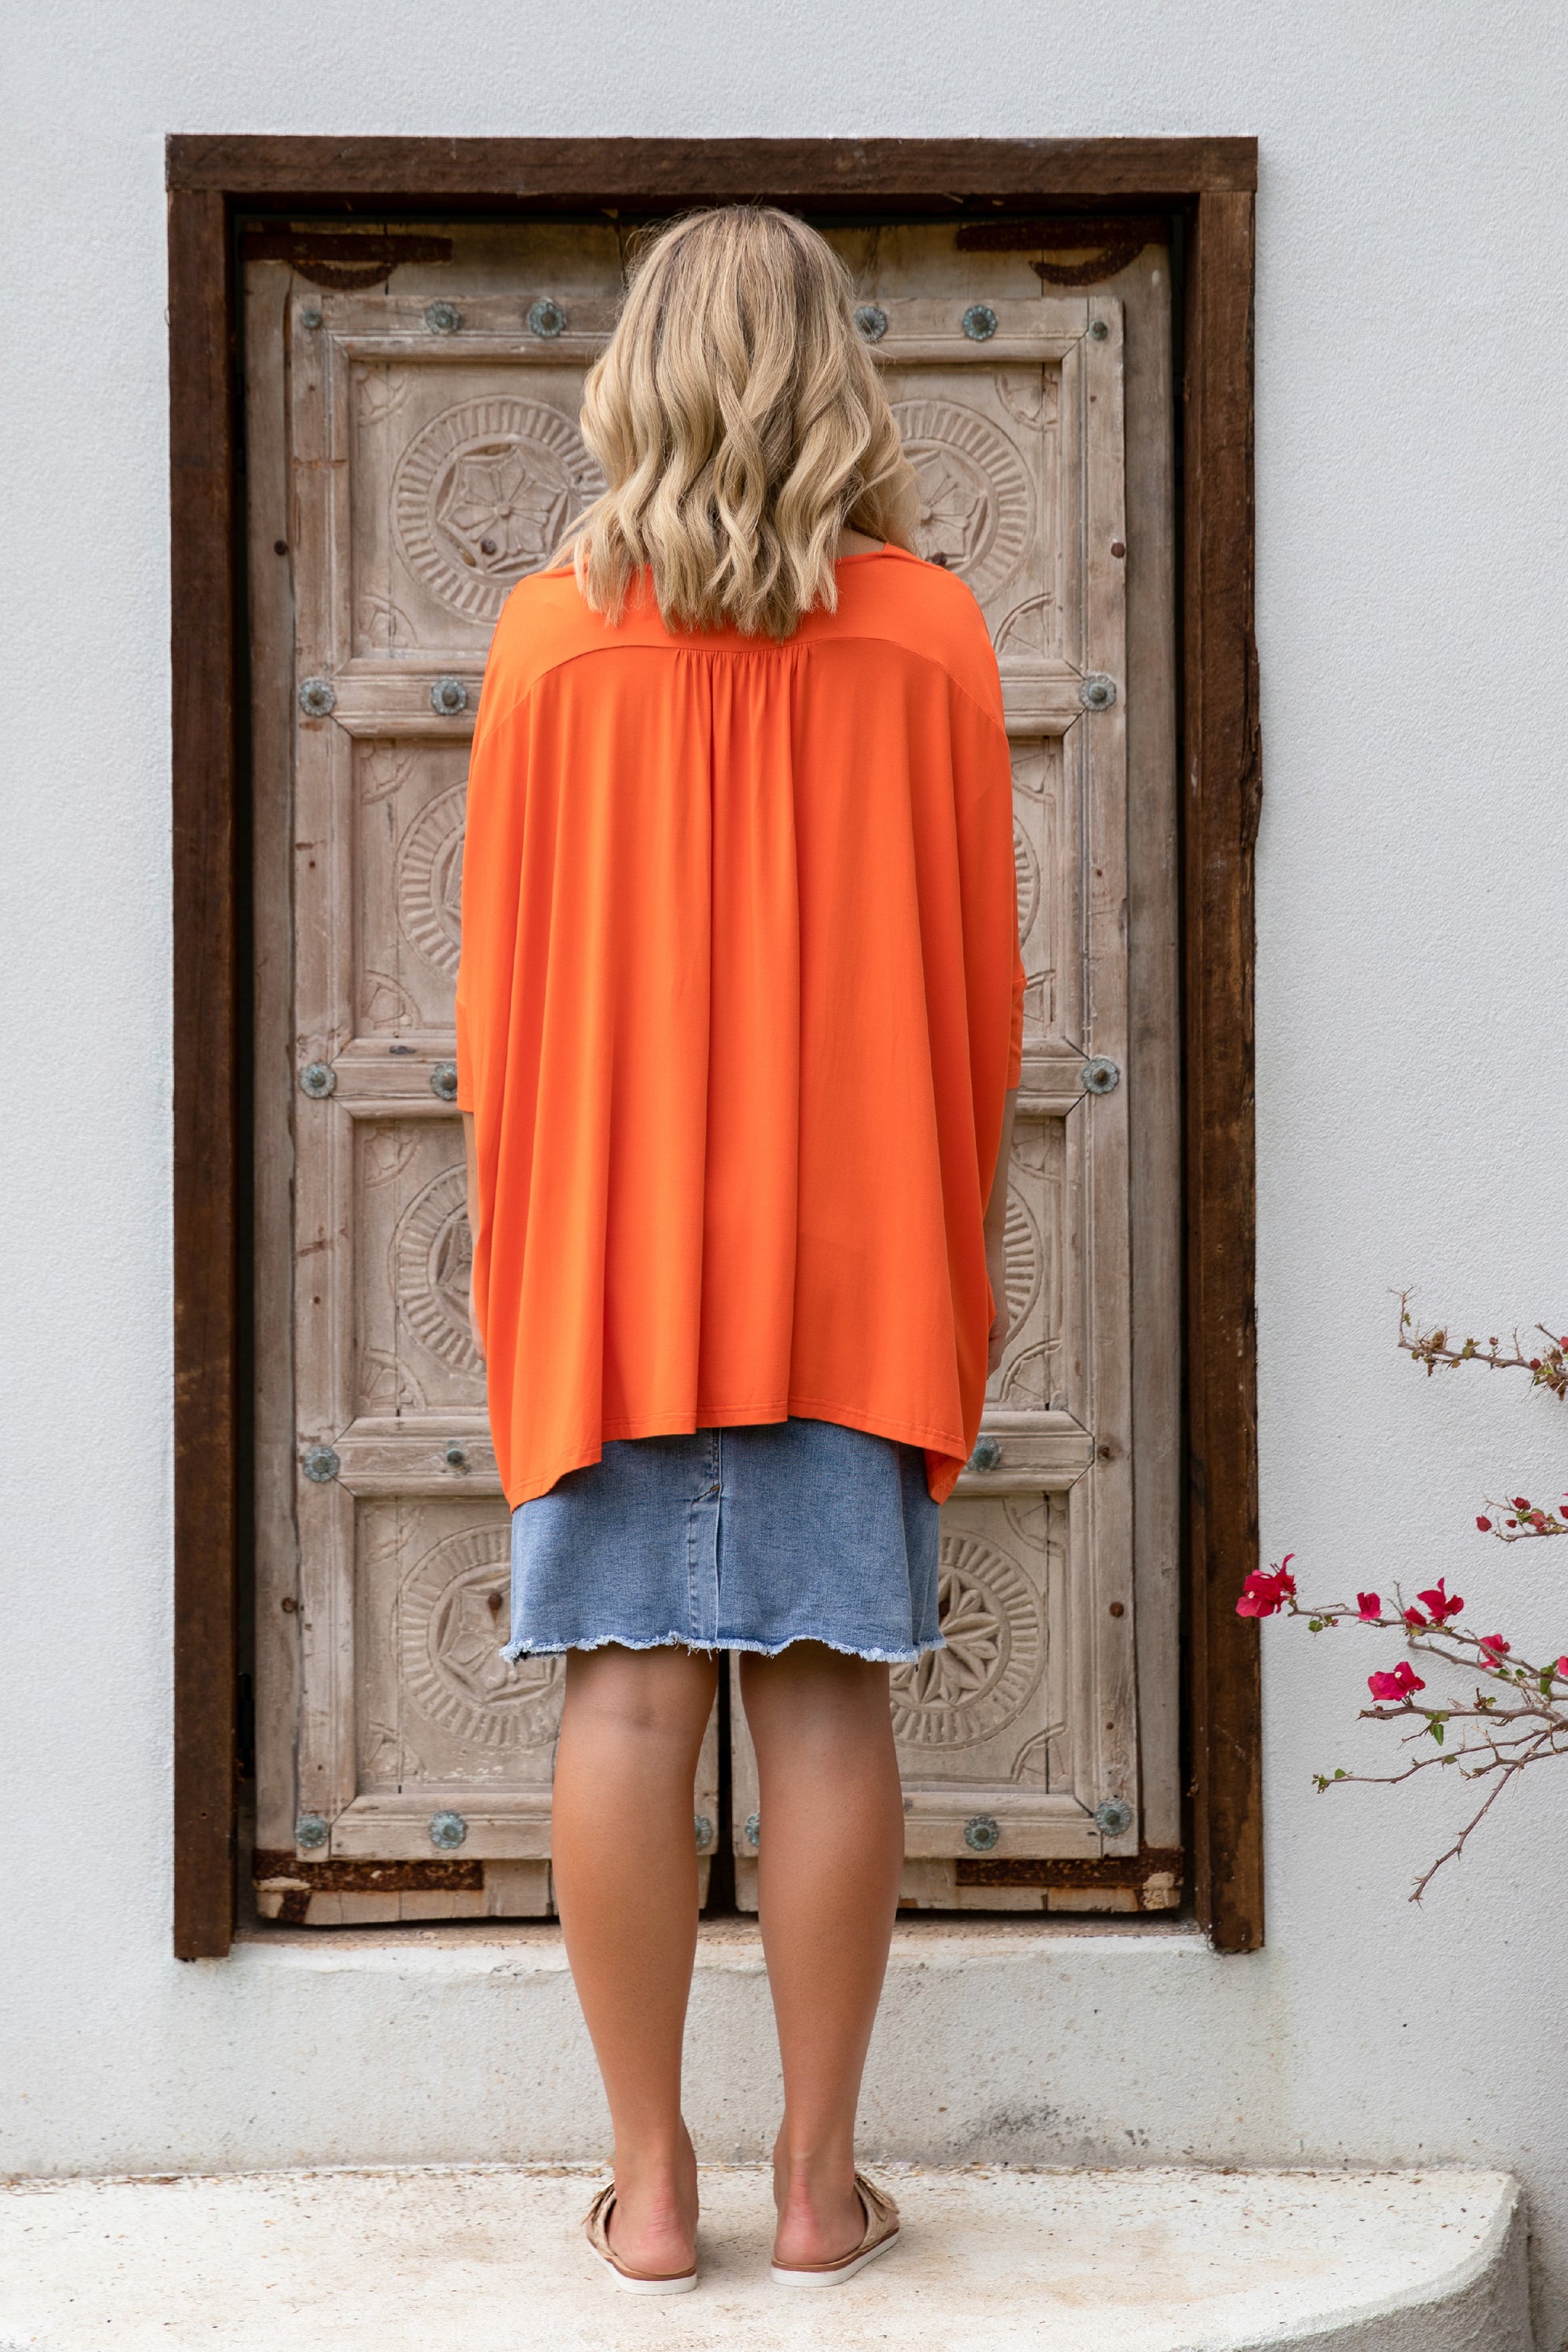 Plus-Sized Orange Top | PQ Collection | Simplicity Top in Scarlett